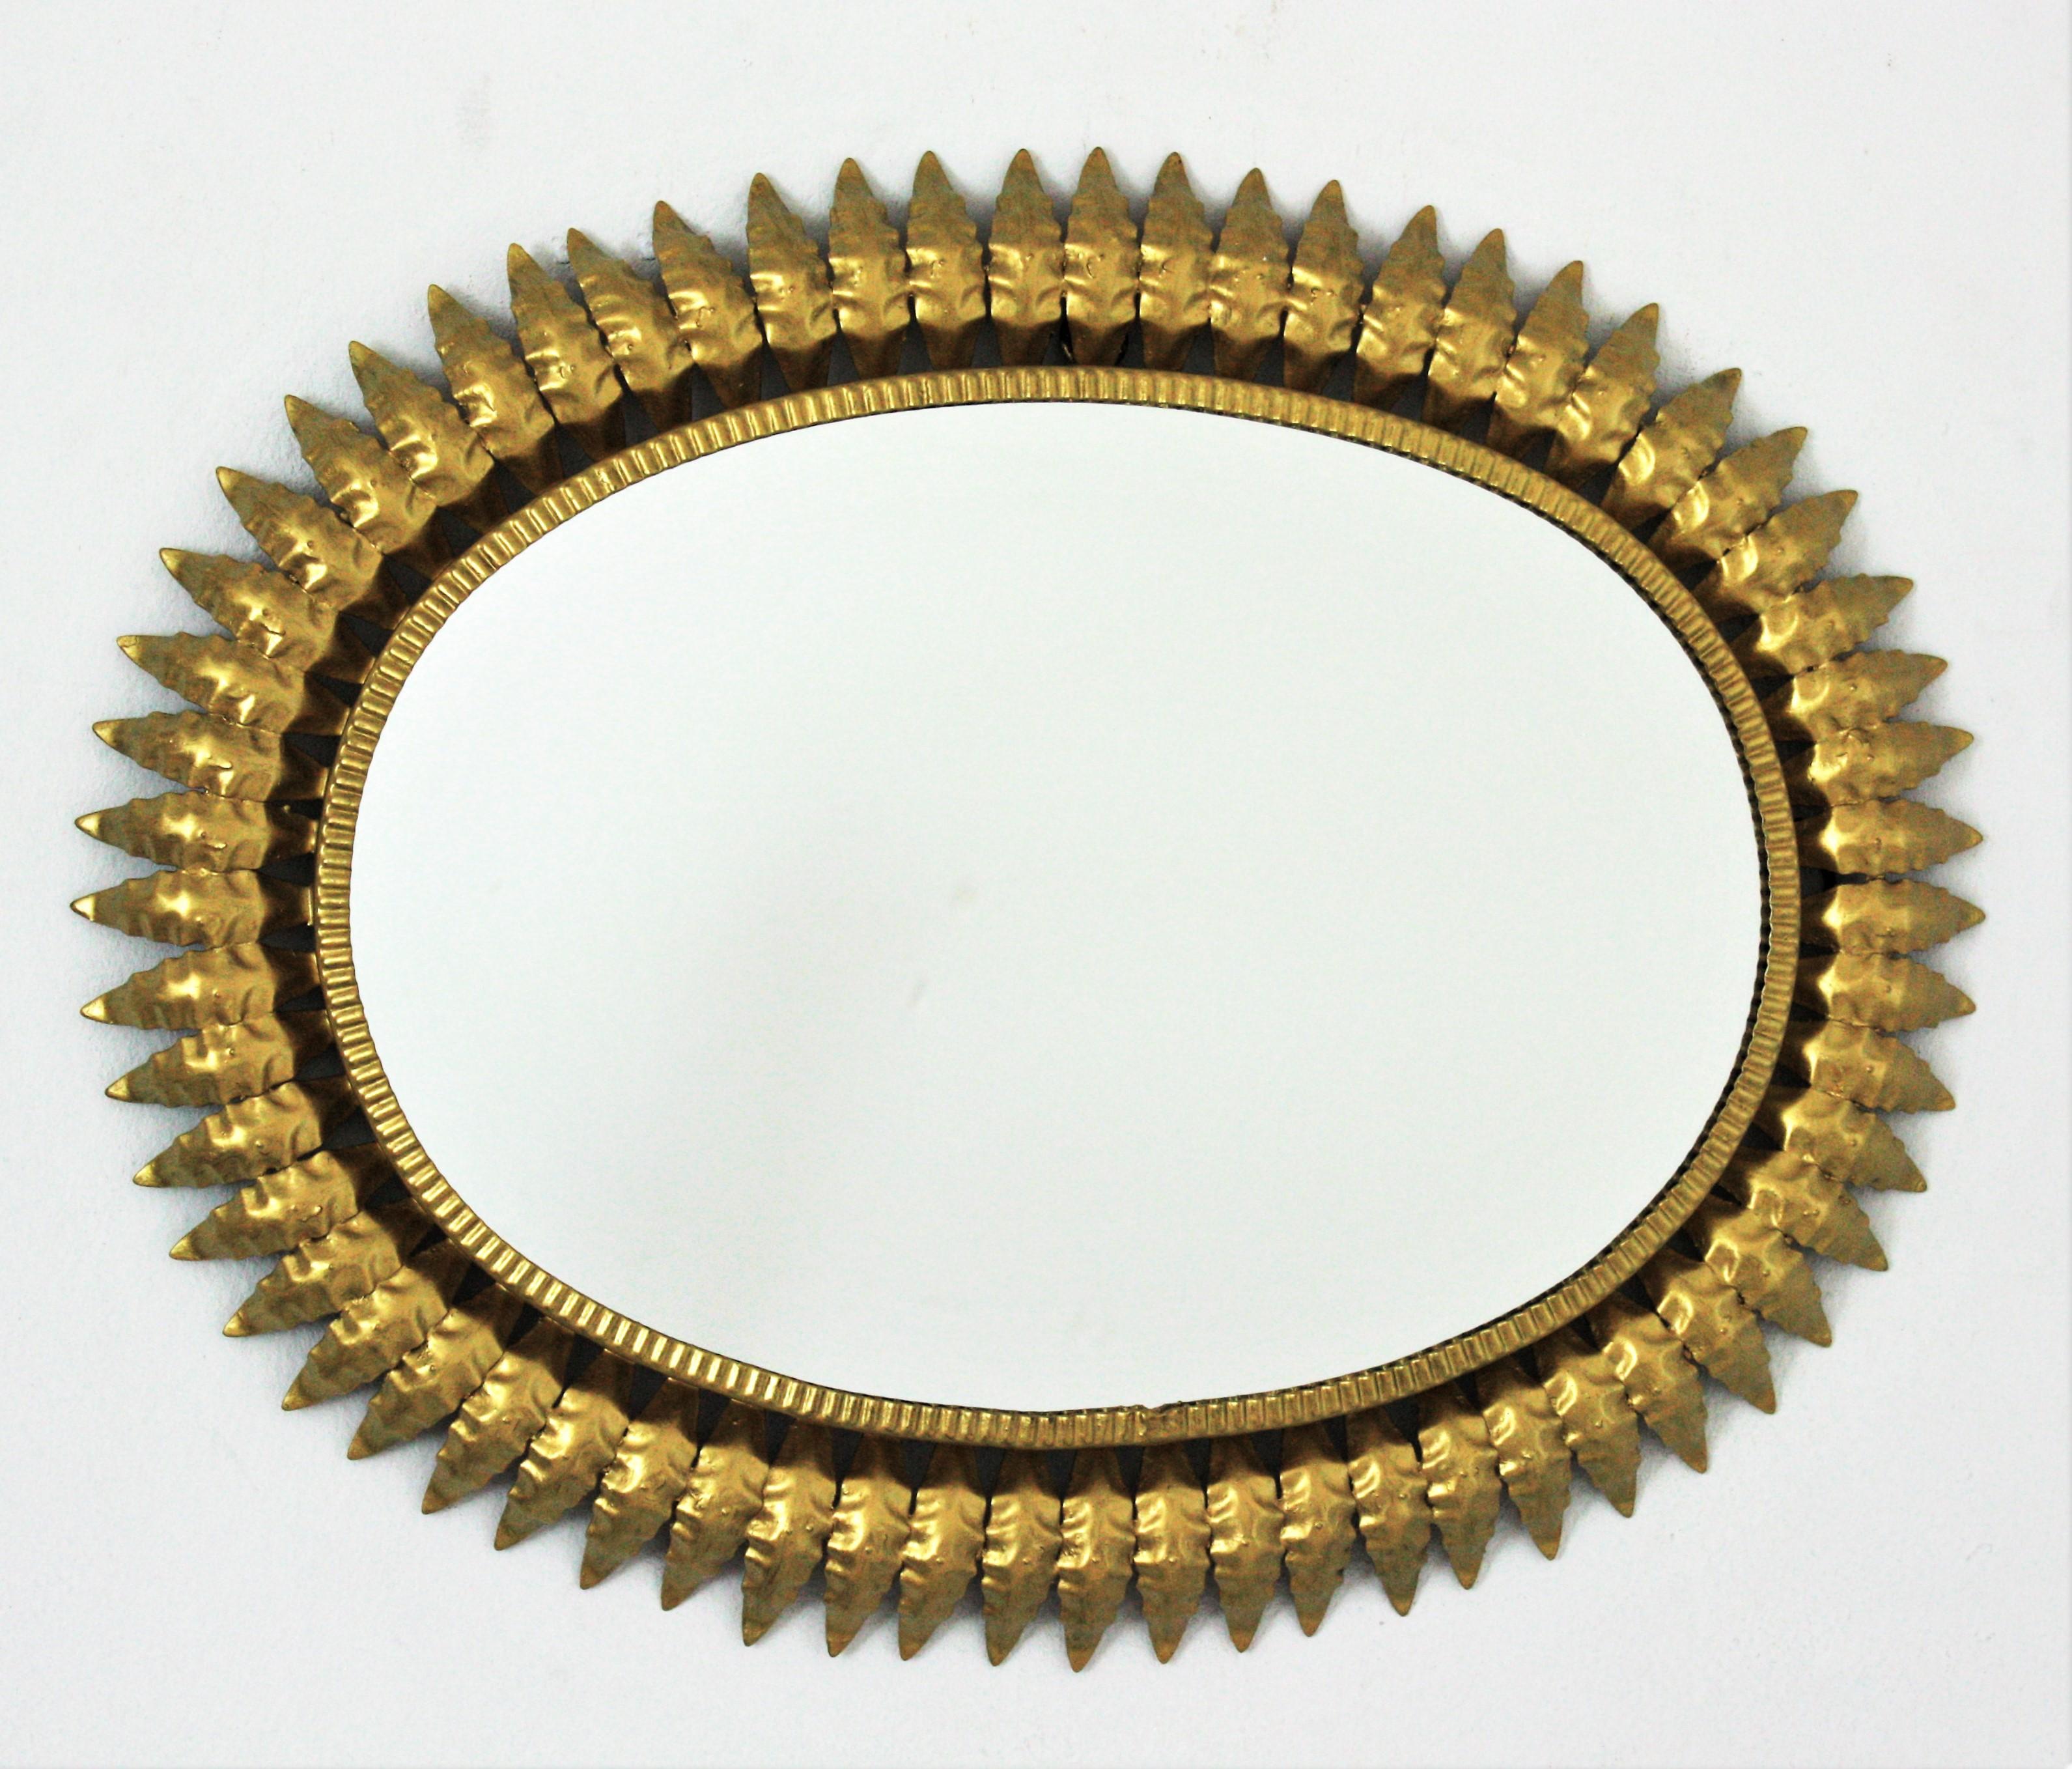 Mid-Century Modern gilt metal sunburst oval wall mirror, Spain, 1960s.
This highly decorative leafed sunburst gilt iron mirror has a nice color and an elegant construction. 
A great choice placed in a powder room, dressing room and over a console